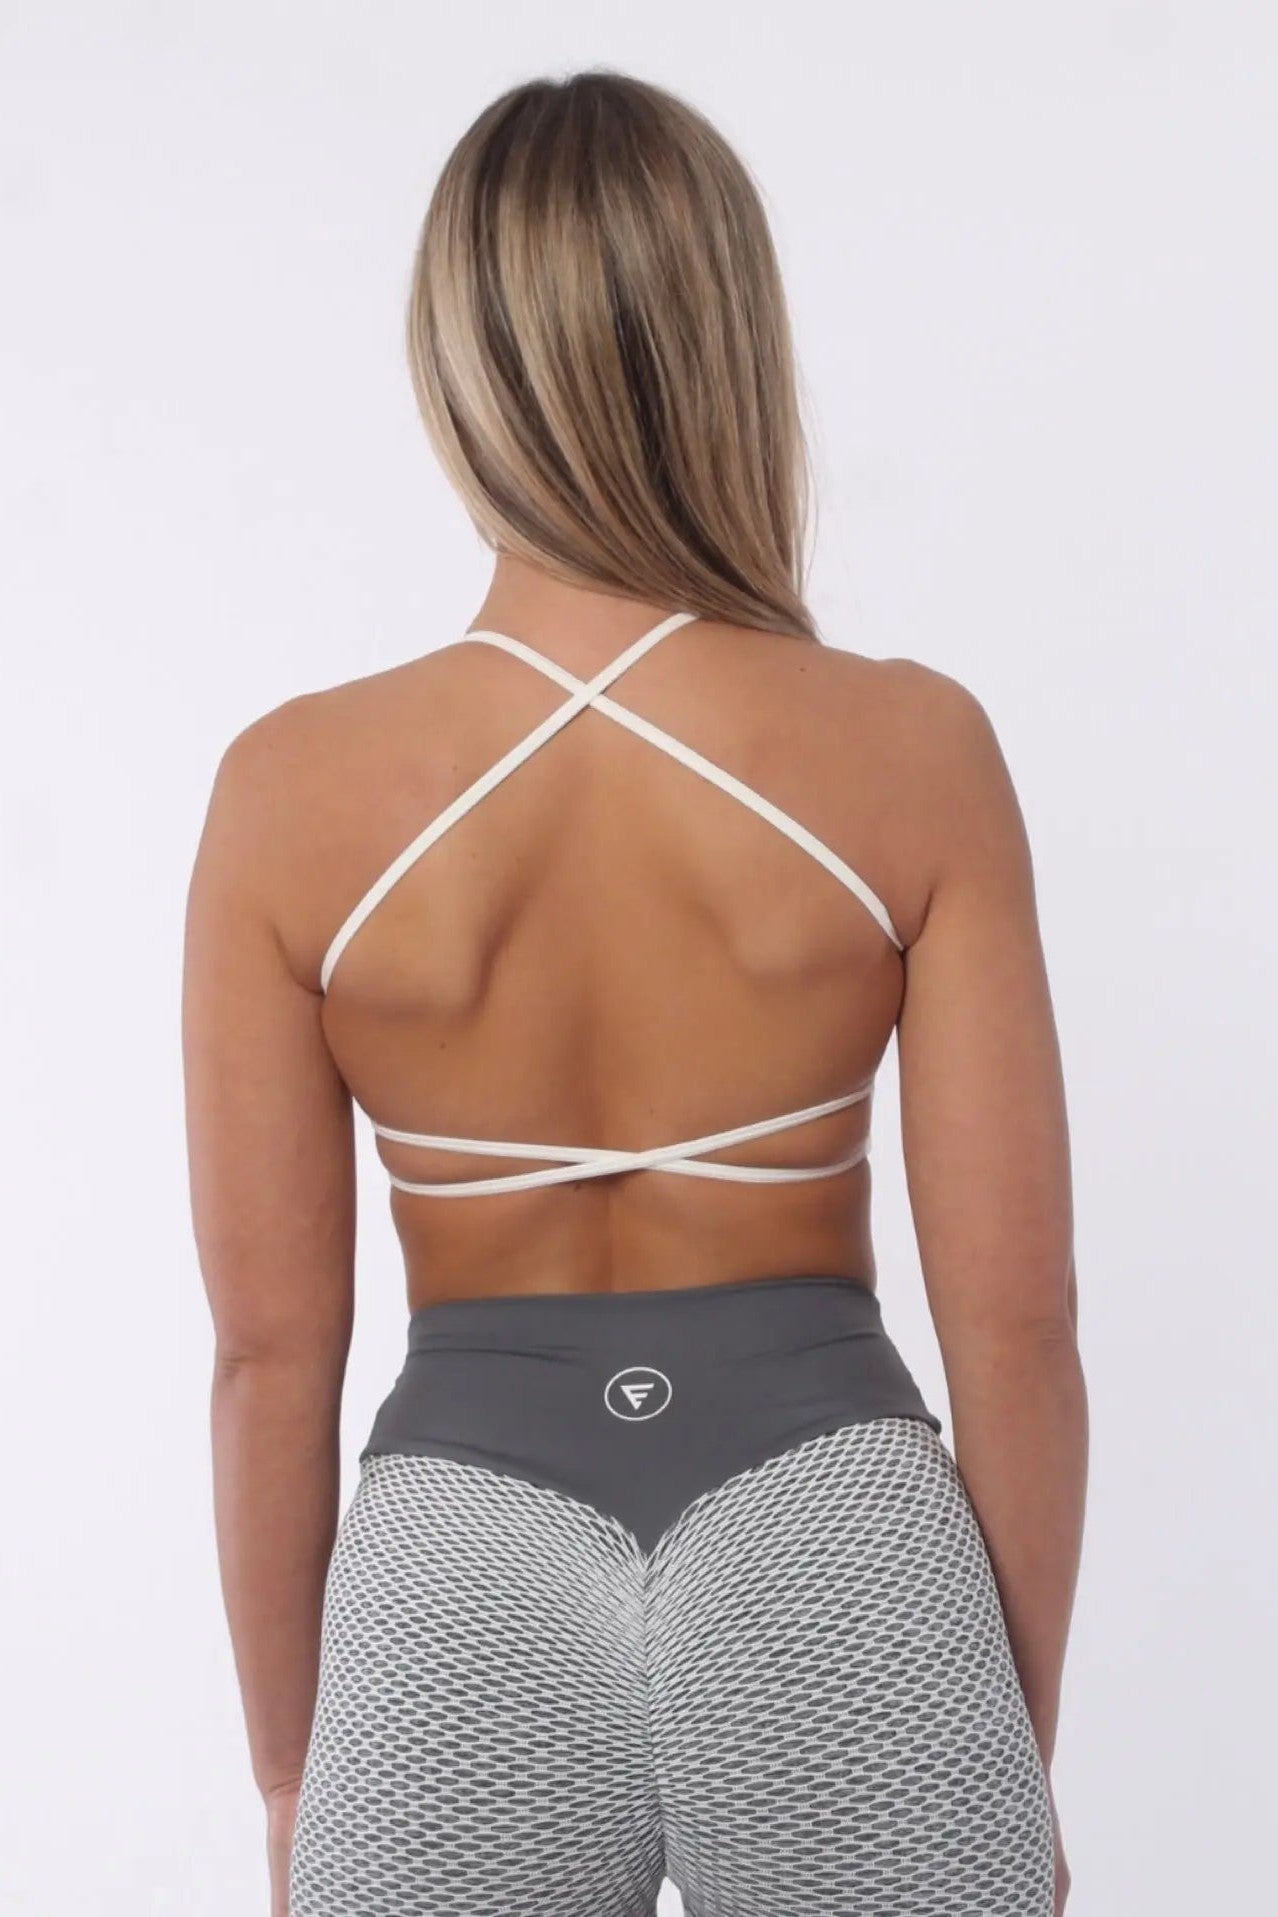 https://empowerclothing.co.uk/cdn/shop/files/Nakd-Collection---Cross-Back-and-Open-Back-Sports-Bra-in-White-Empowerclothingltd-Empowerclothingltd-1684499543.jpg?v=1699822344